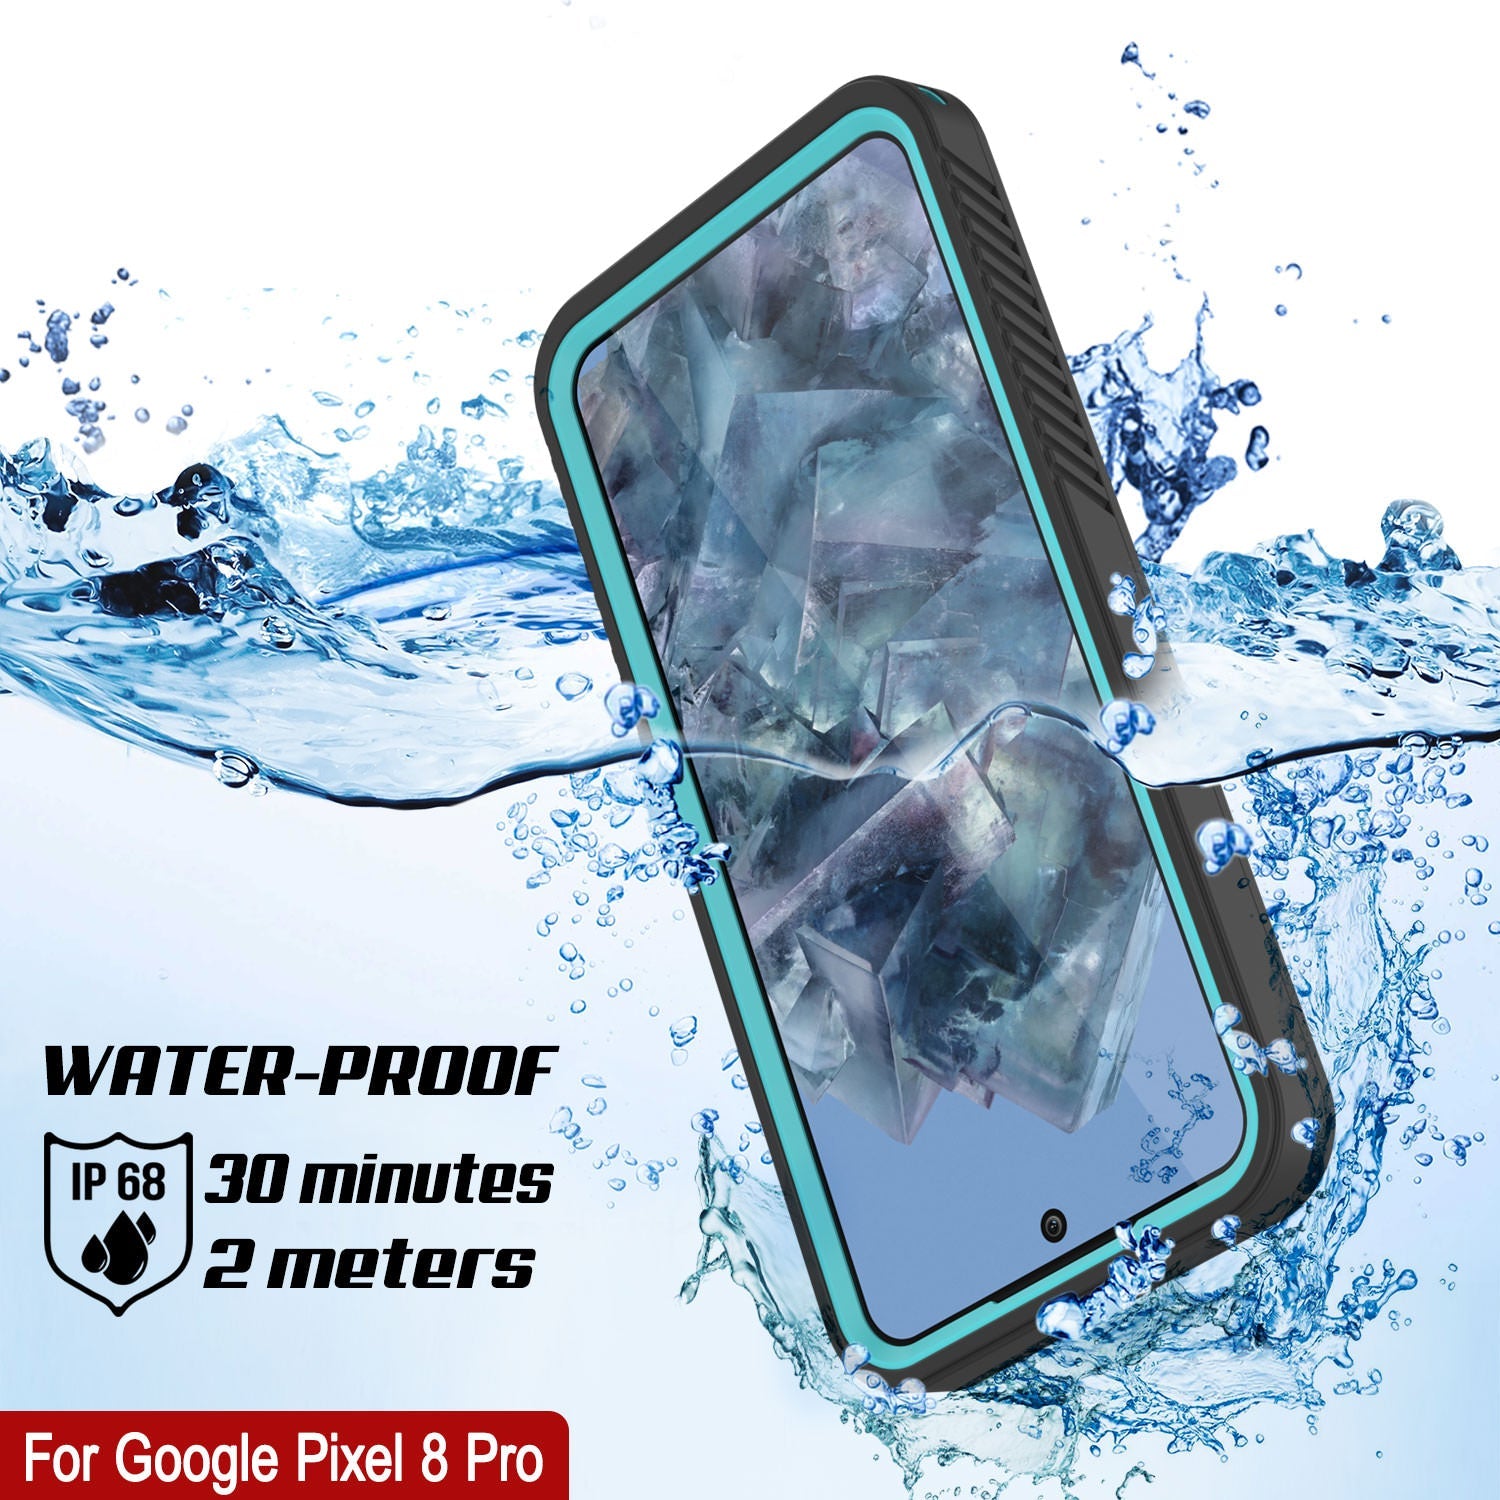 Google Pixel 8 Pro Waterproof Case, Punkcase [Extreme Series] Armor Cover W/ Built In Screen Protector [Teal]